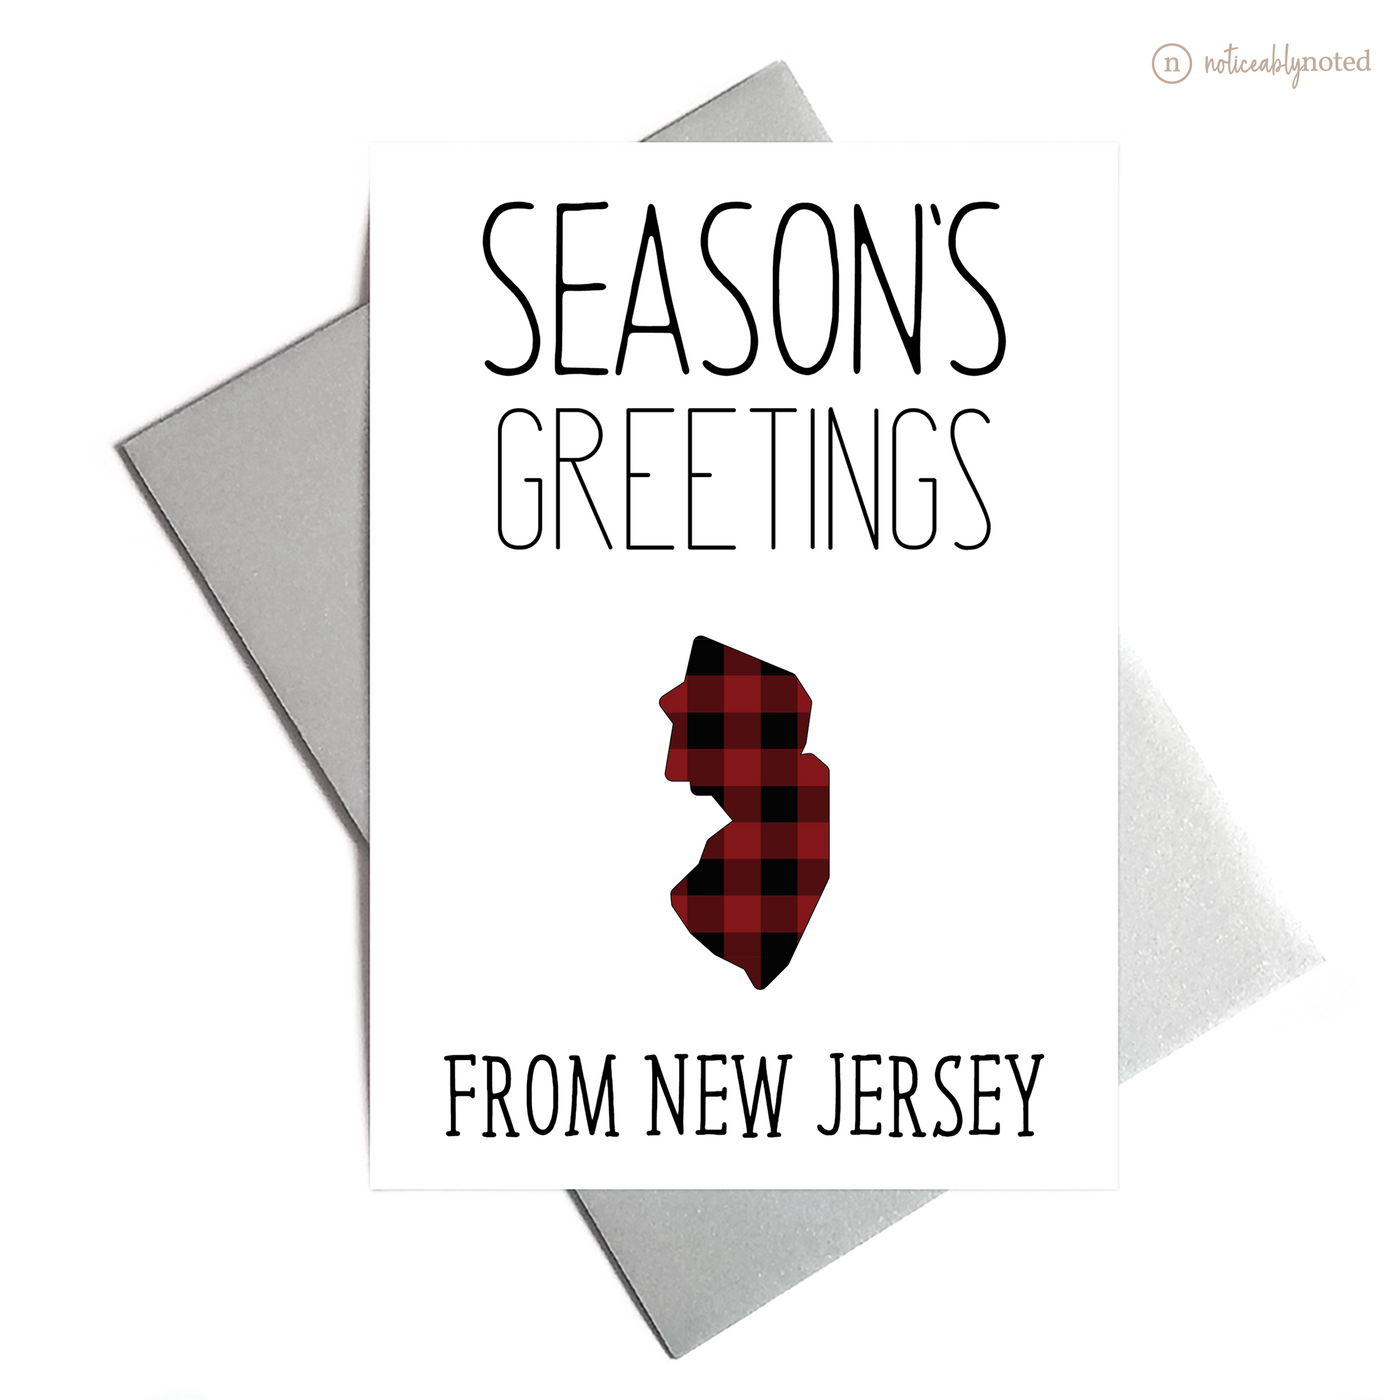 New Jersey Christmas Cards | Noticeably Noted